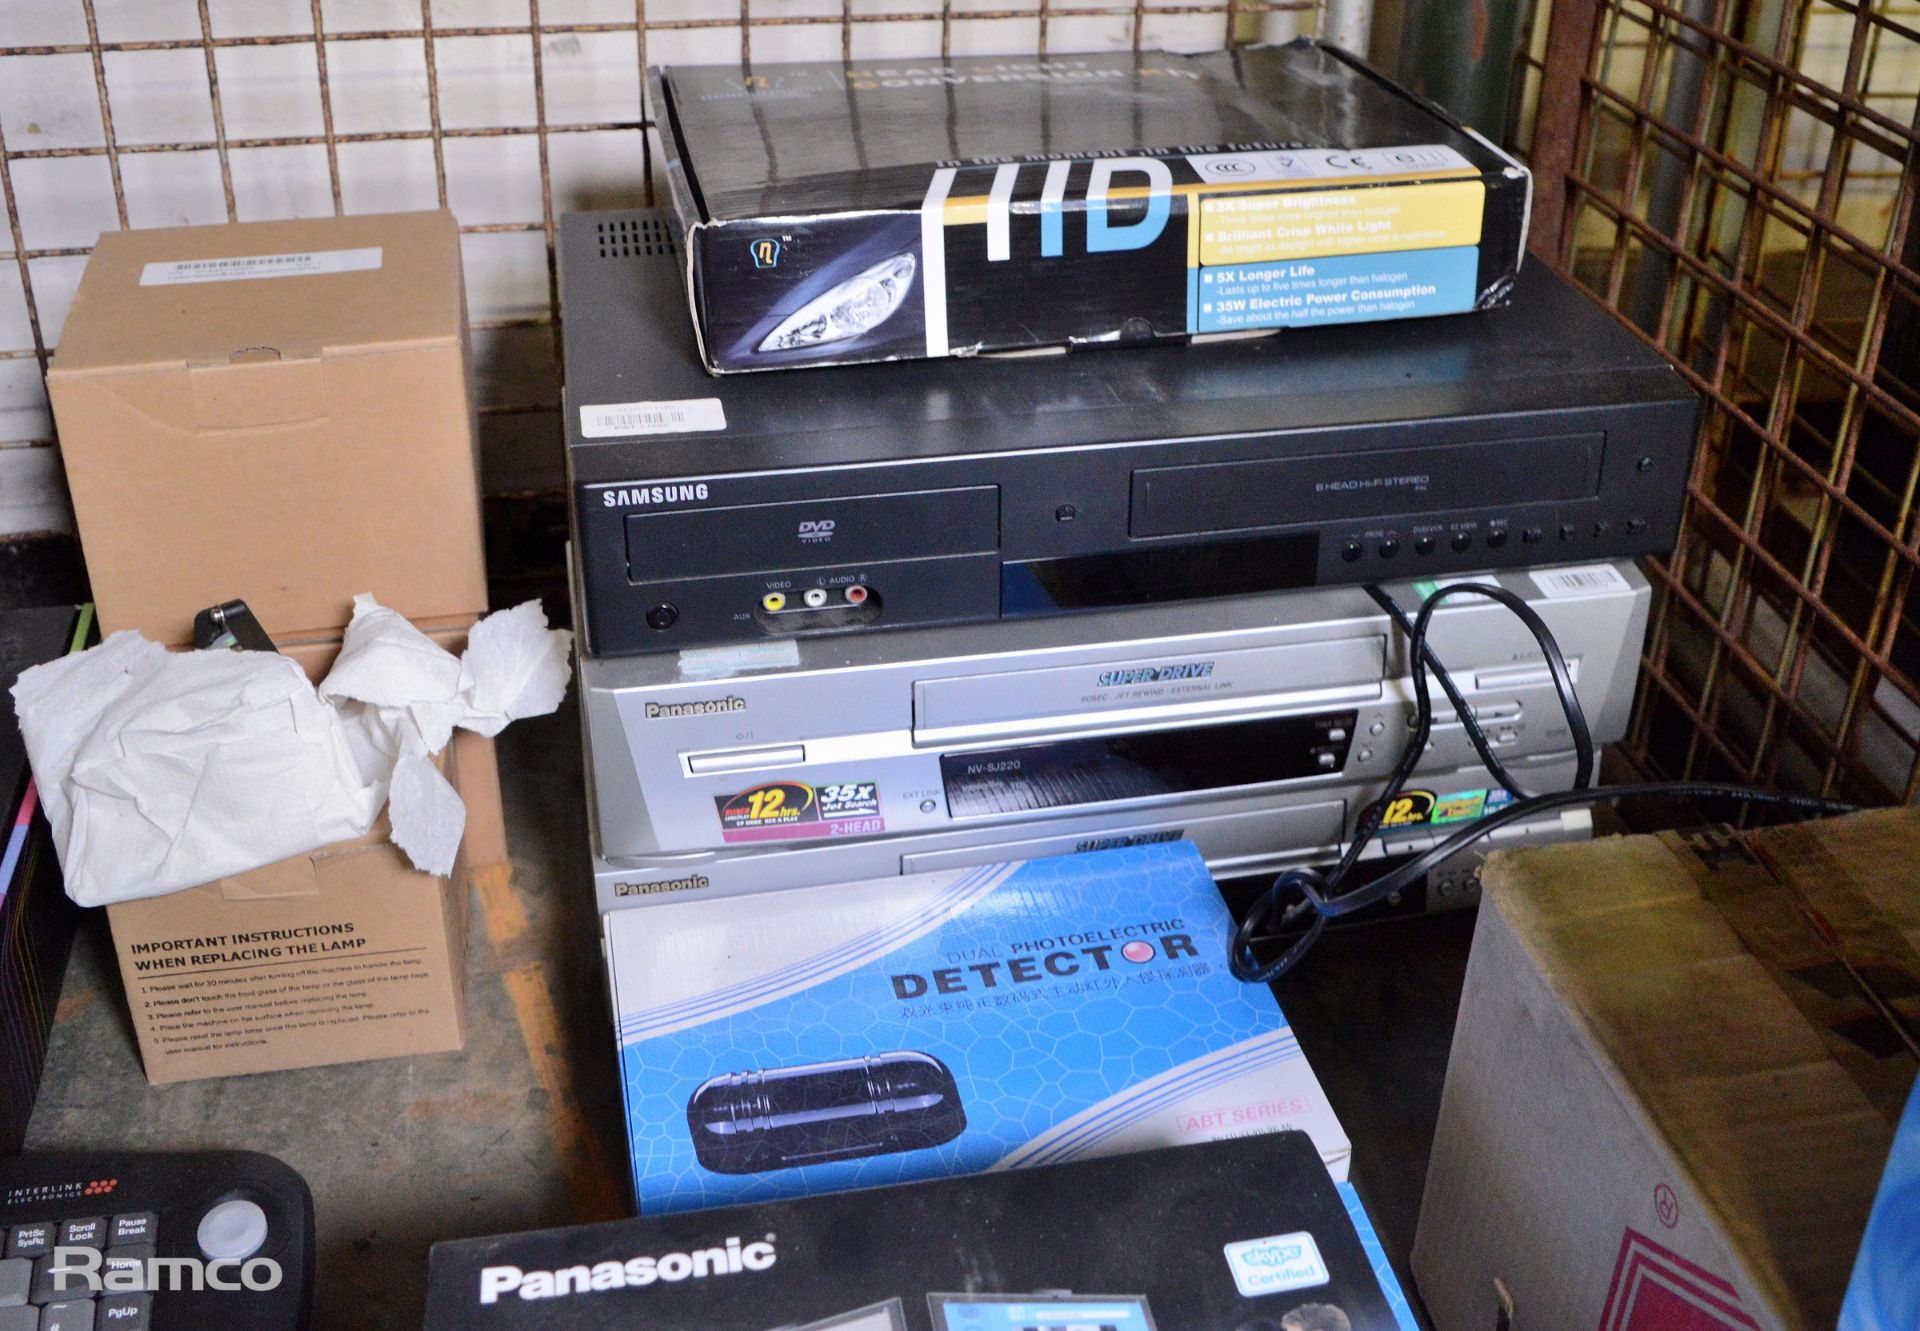 Electrical Equipment and Accessories - DVD & VHS Players, Routers, Internet Thermostat, Keyboards - Image 4 of 6